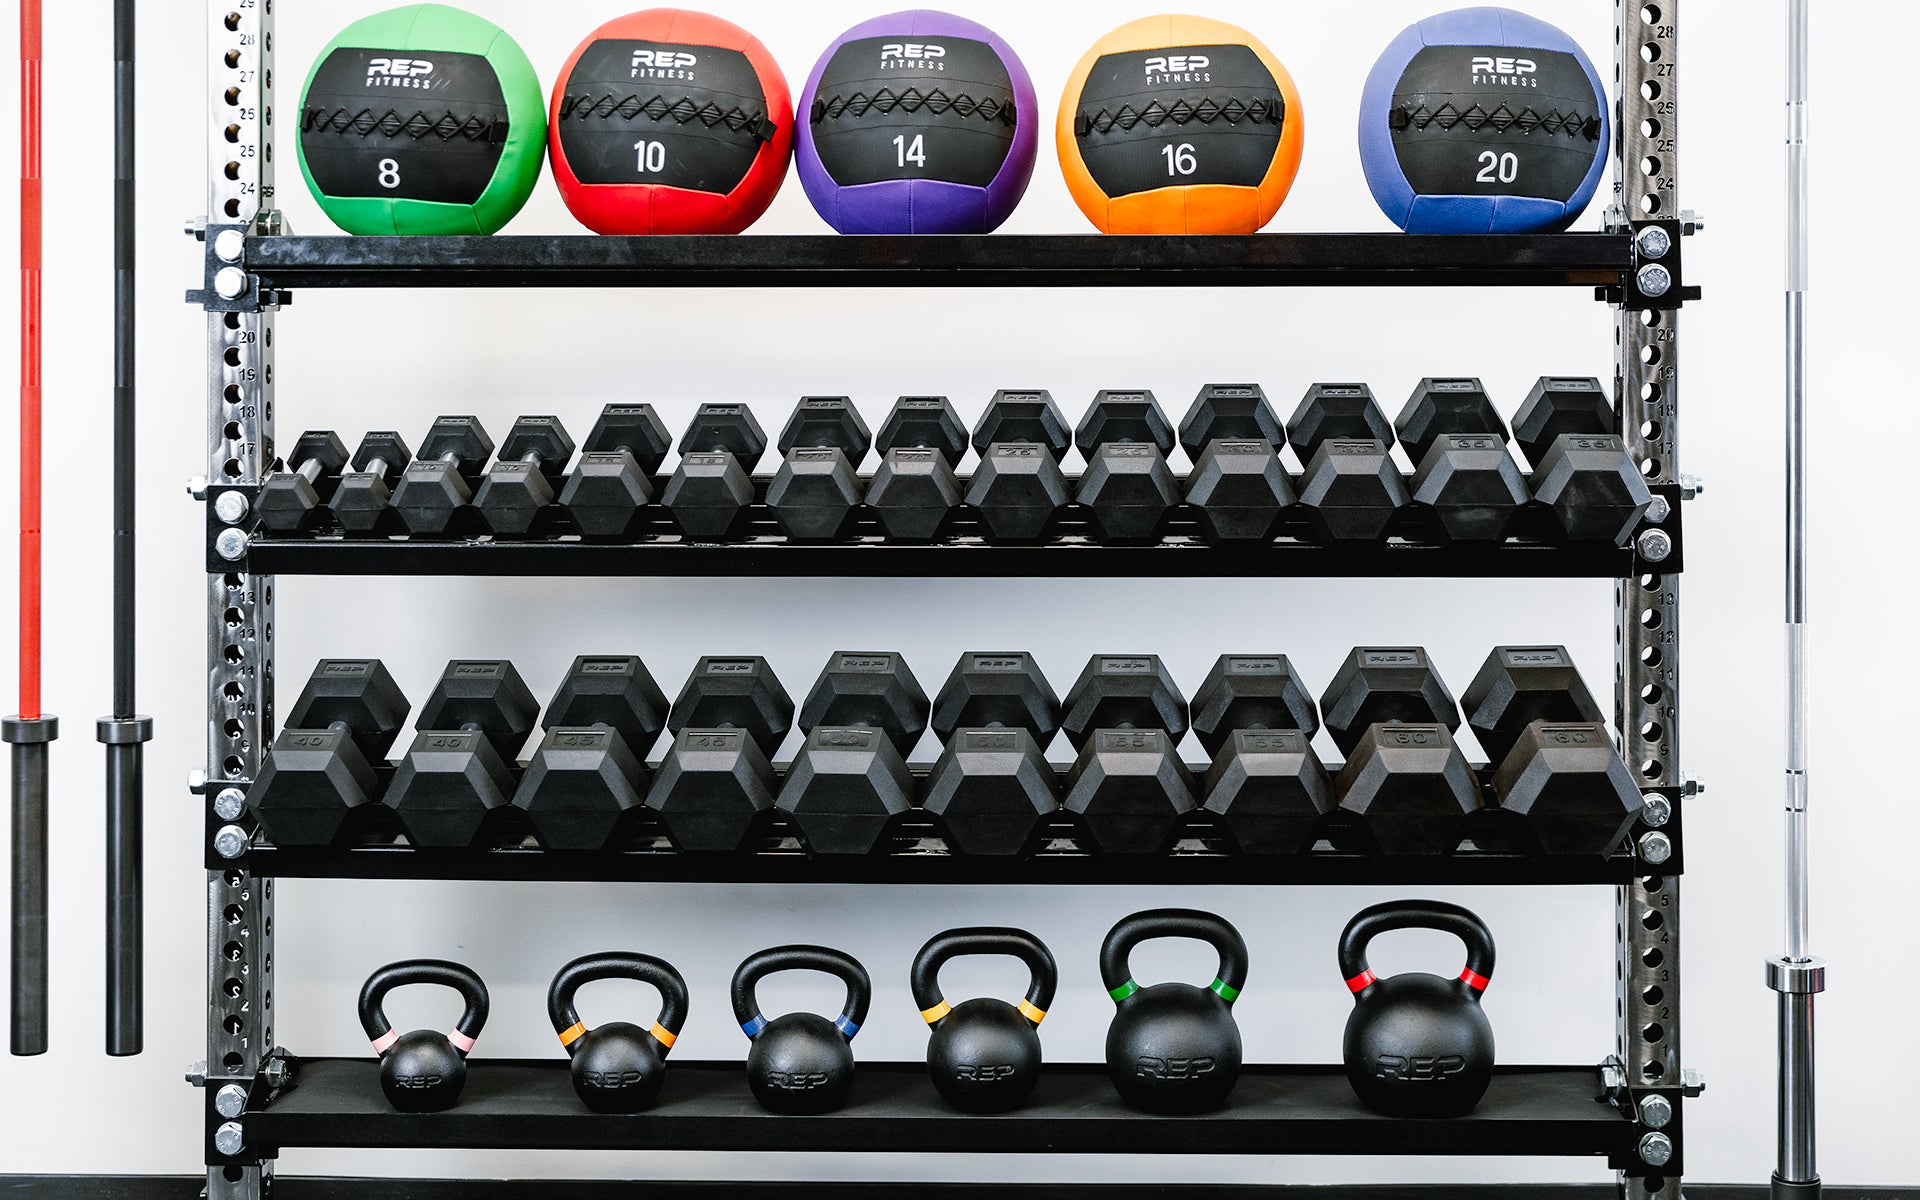 Functional Trainer With Storage - Showing kettlebells, dumbbells, and medicine balls being stored on shelves